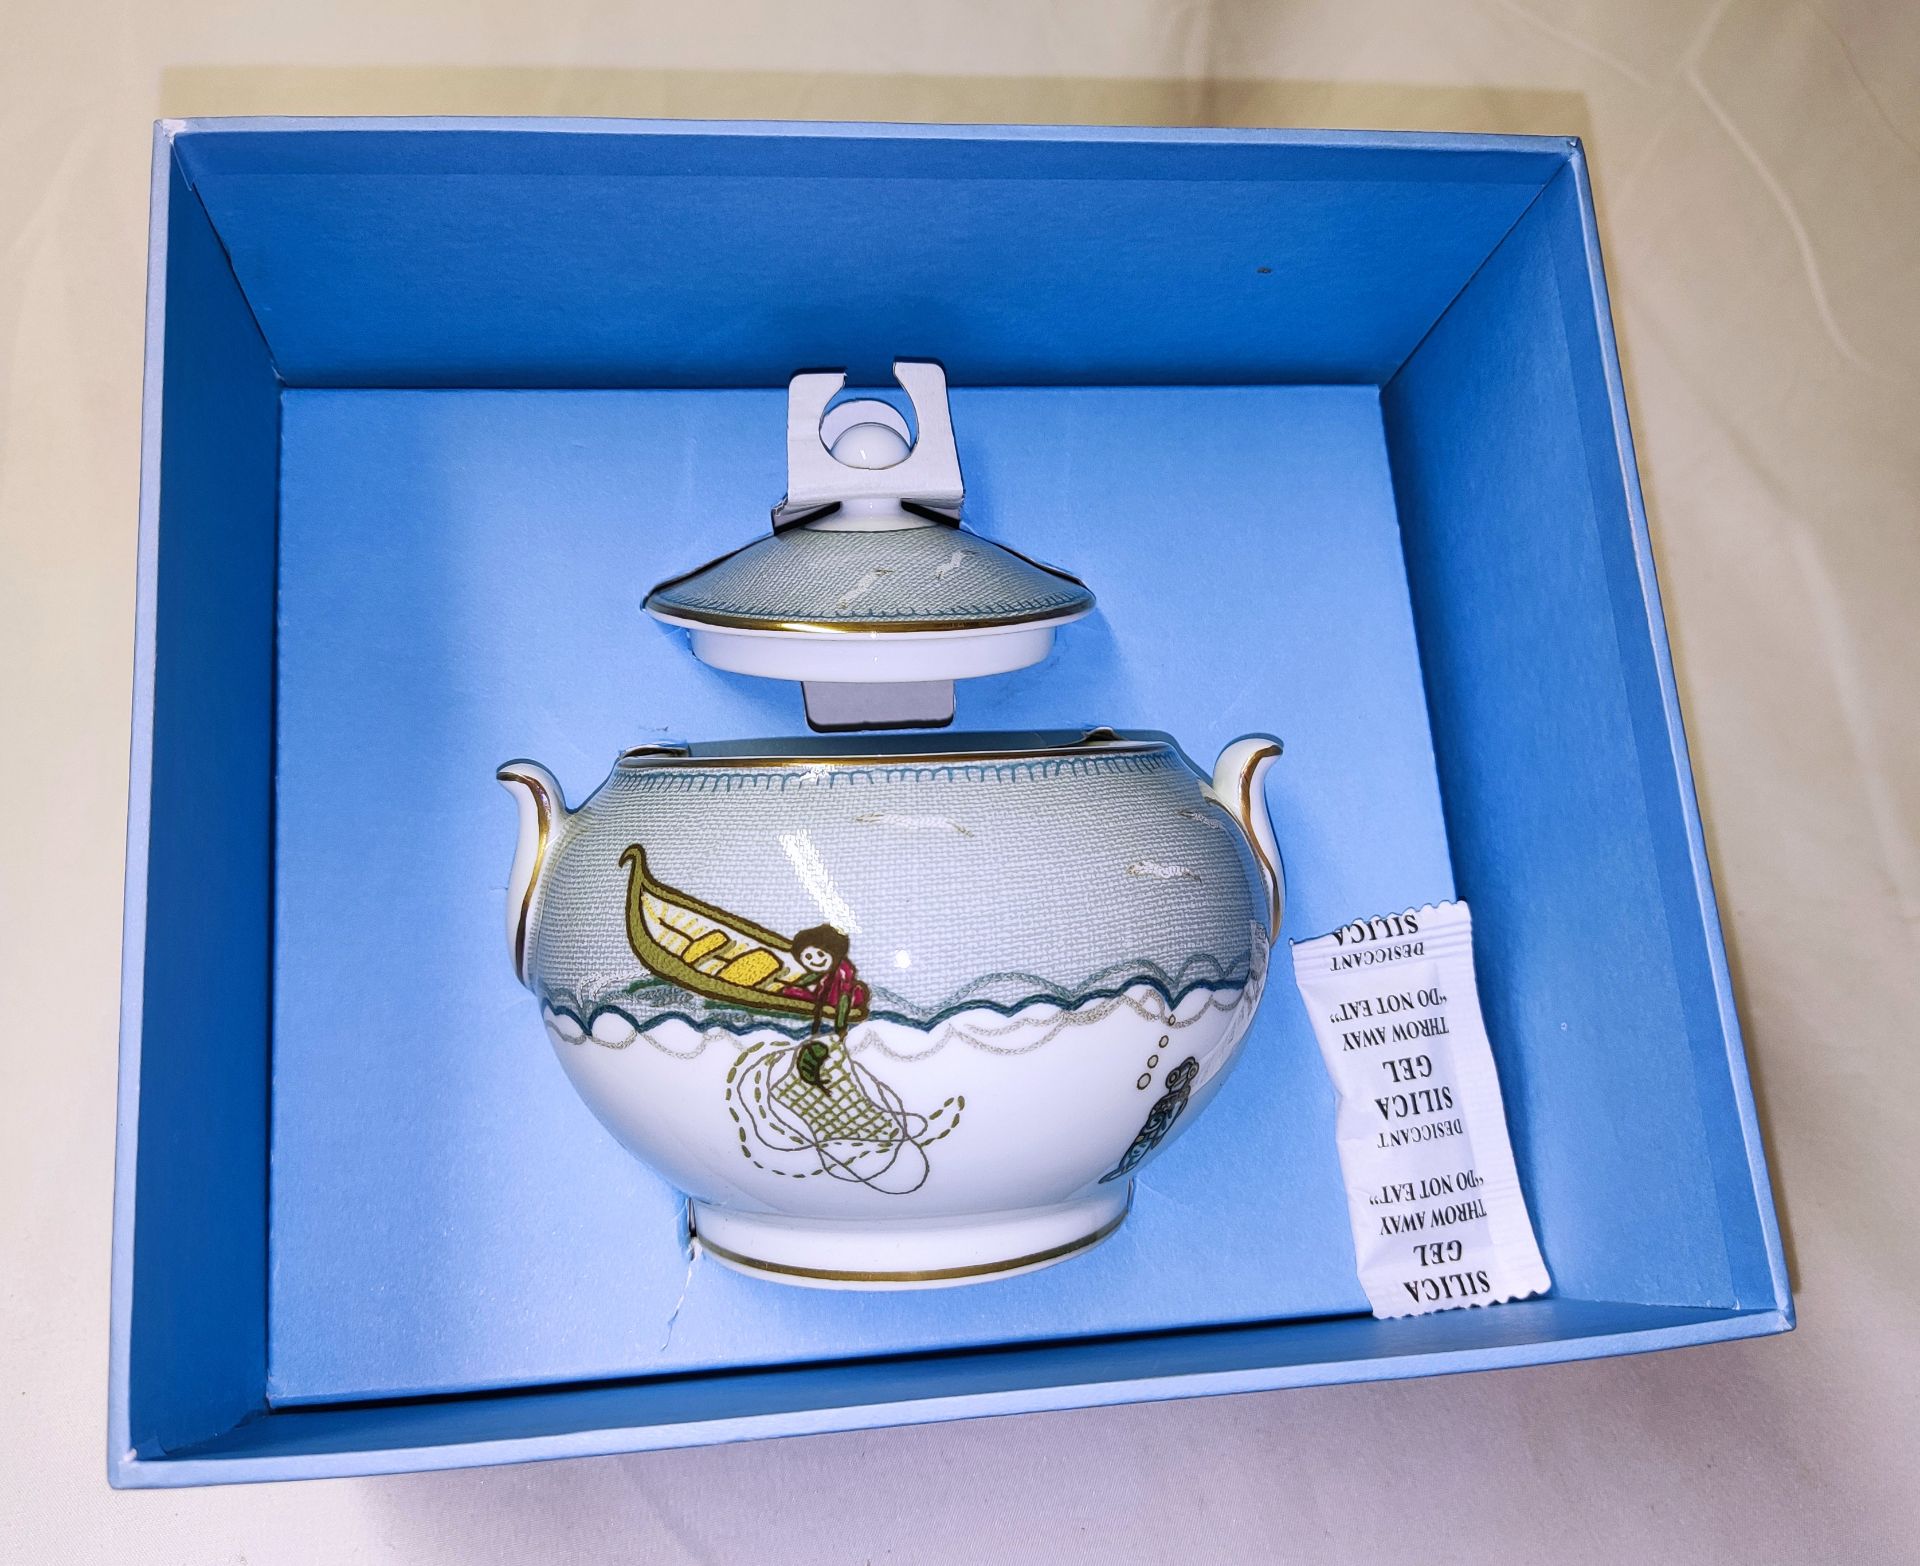 1 x WEDGWOOD Sailors Farewell Large Covered Fine Bone China Sugar Bowl - New/Boxed - RRP £105 - Ref: - Image 7 of 18